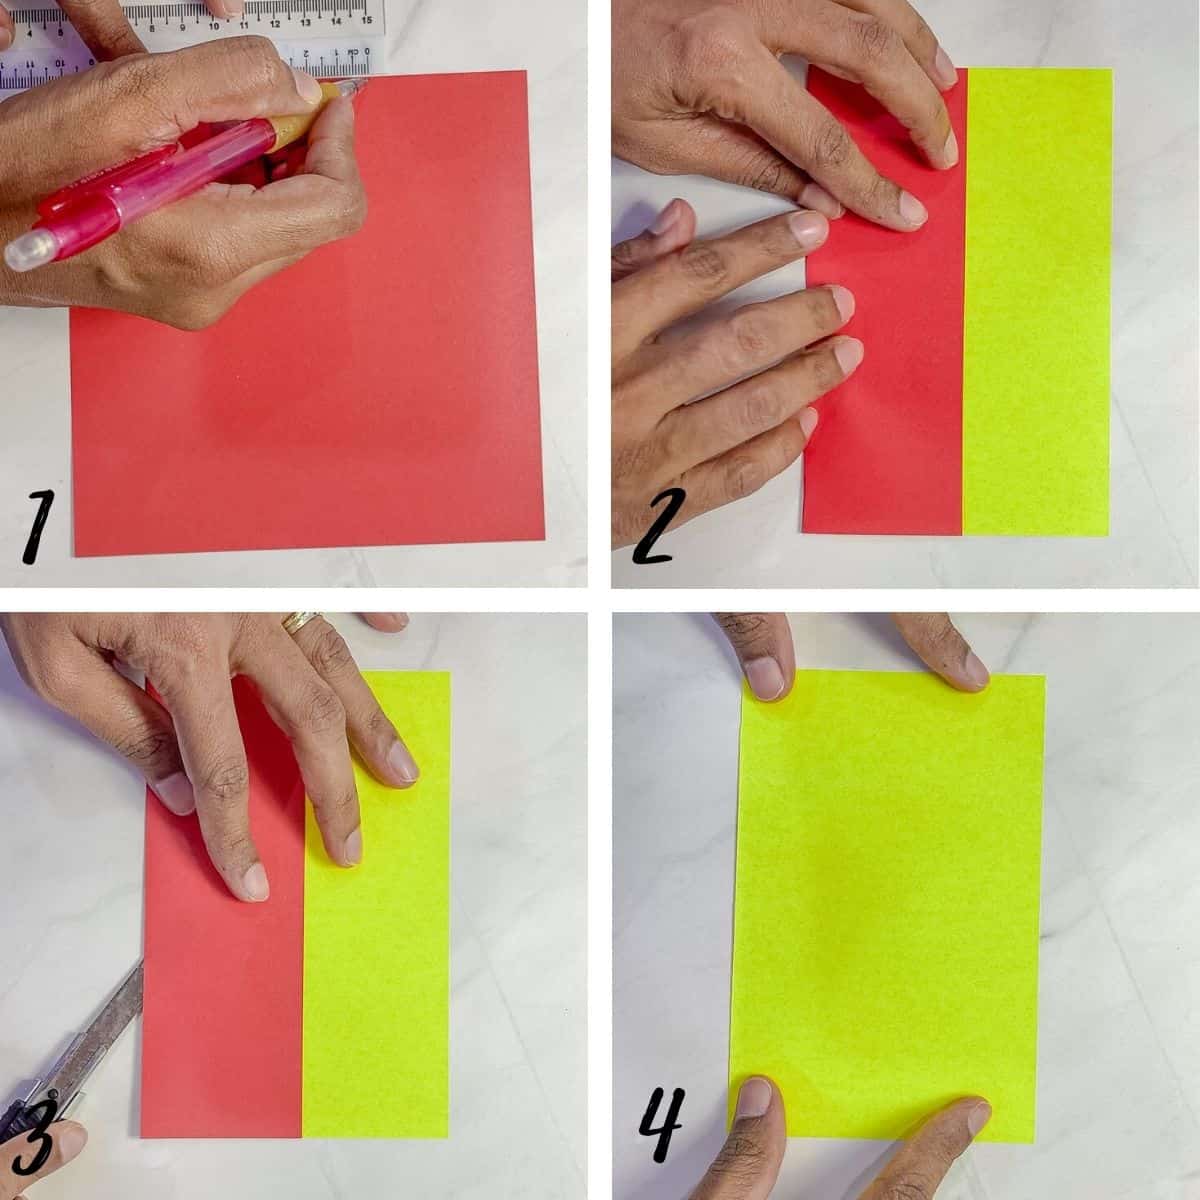 A poster of 4 images showing how to fold a red and yellow paper to make origami koi fish.